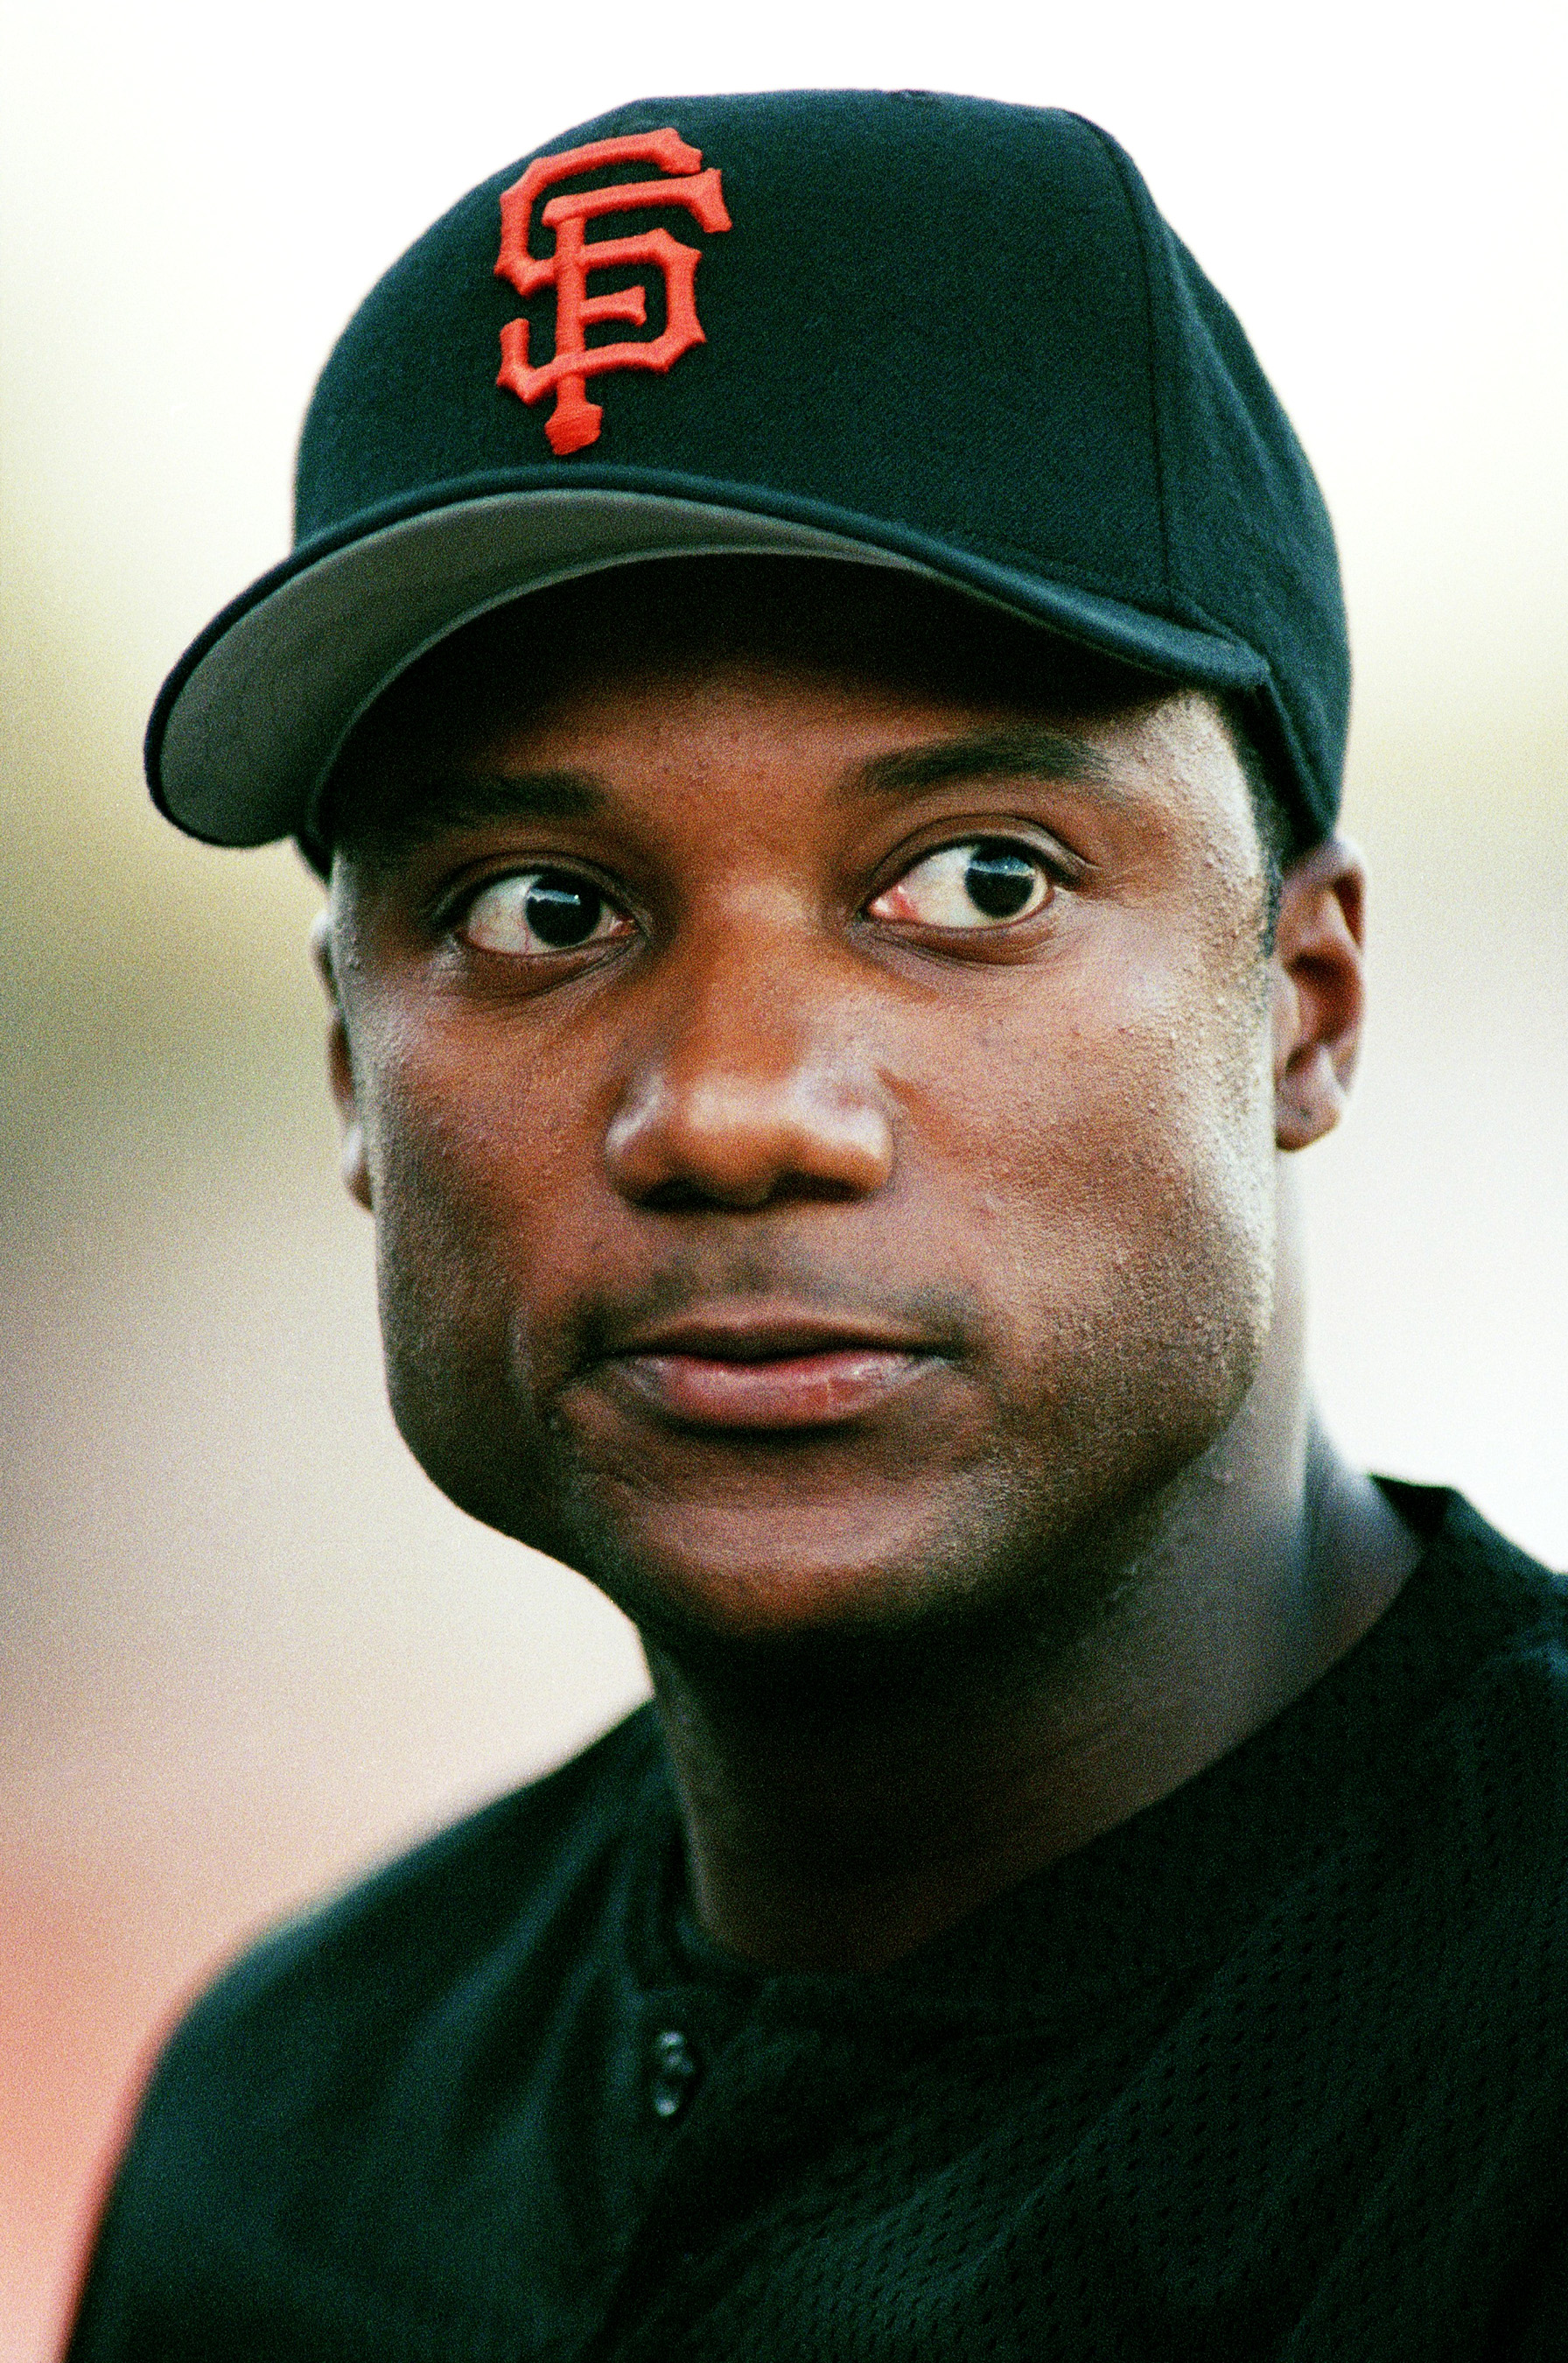 Darryl Hamilton, then playing on the San Francisco Giants, during a game at Dodger Stadium in Los Angeles, California during the 1997 season. (Larry Goren–AP)